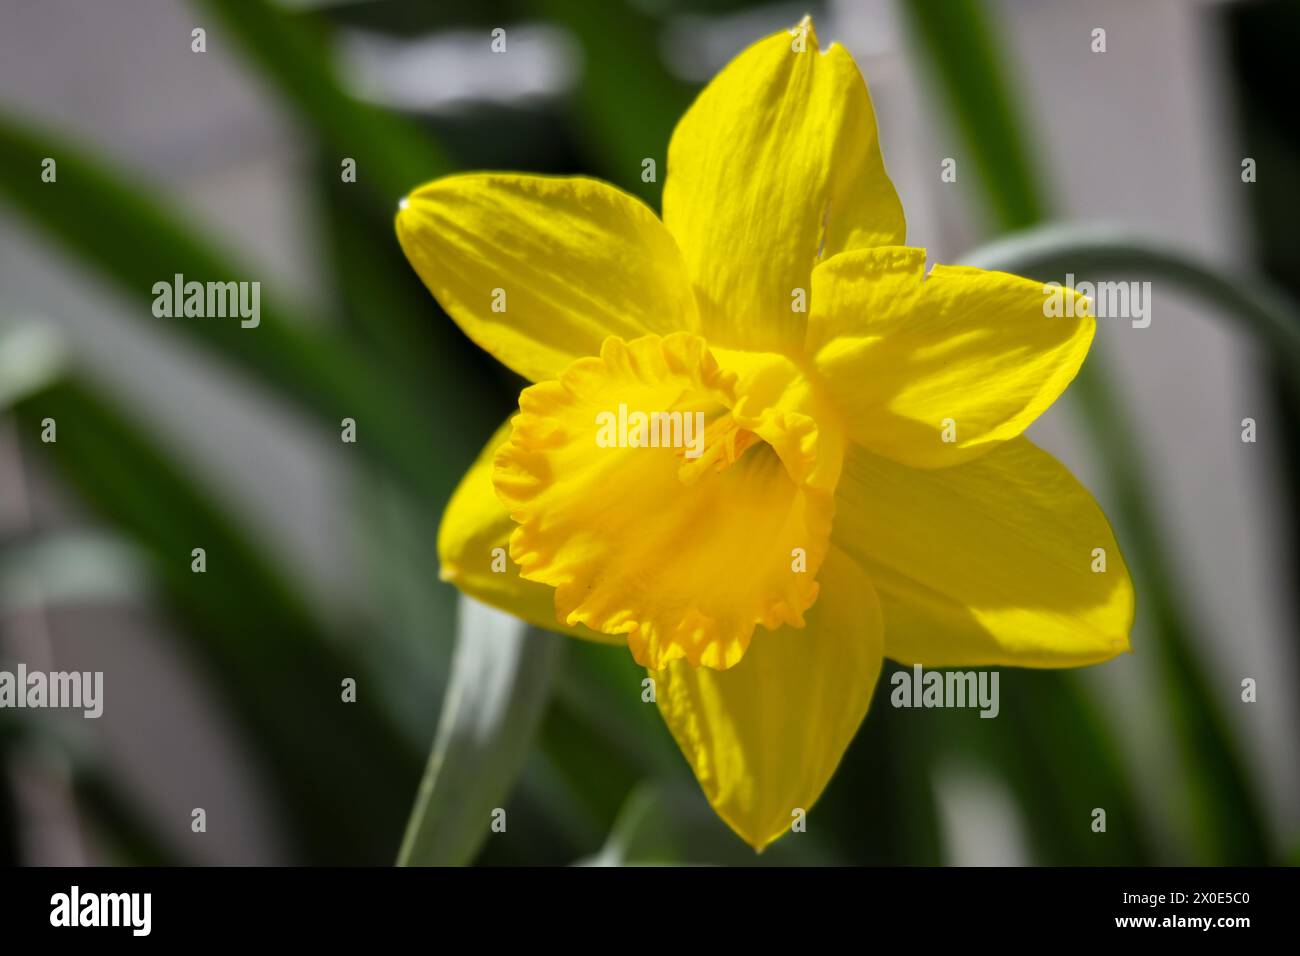 A daffodil bloom in the warm spring sunlight. Stock Photo